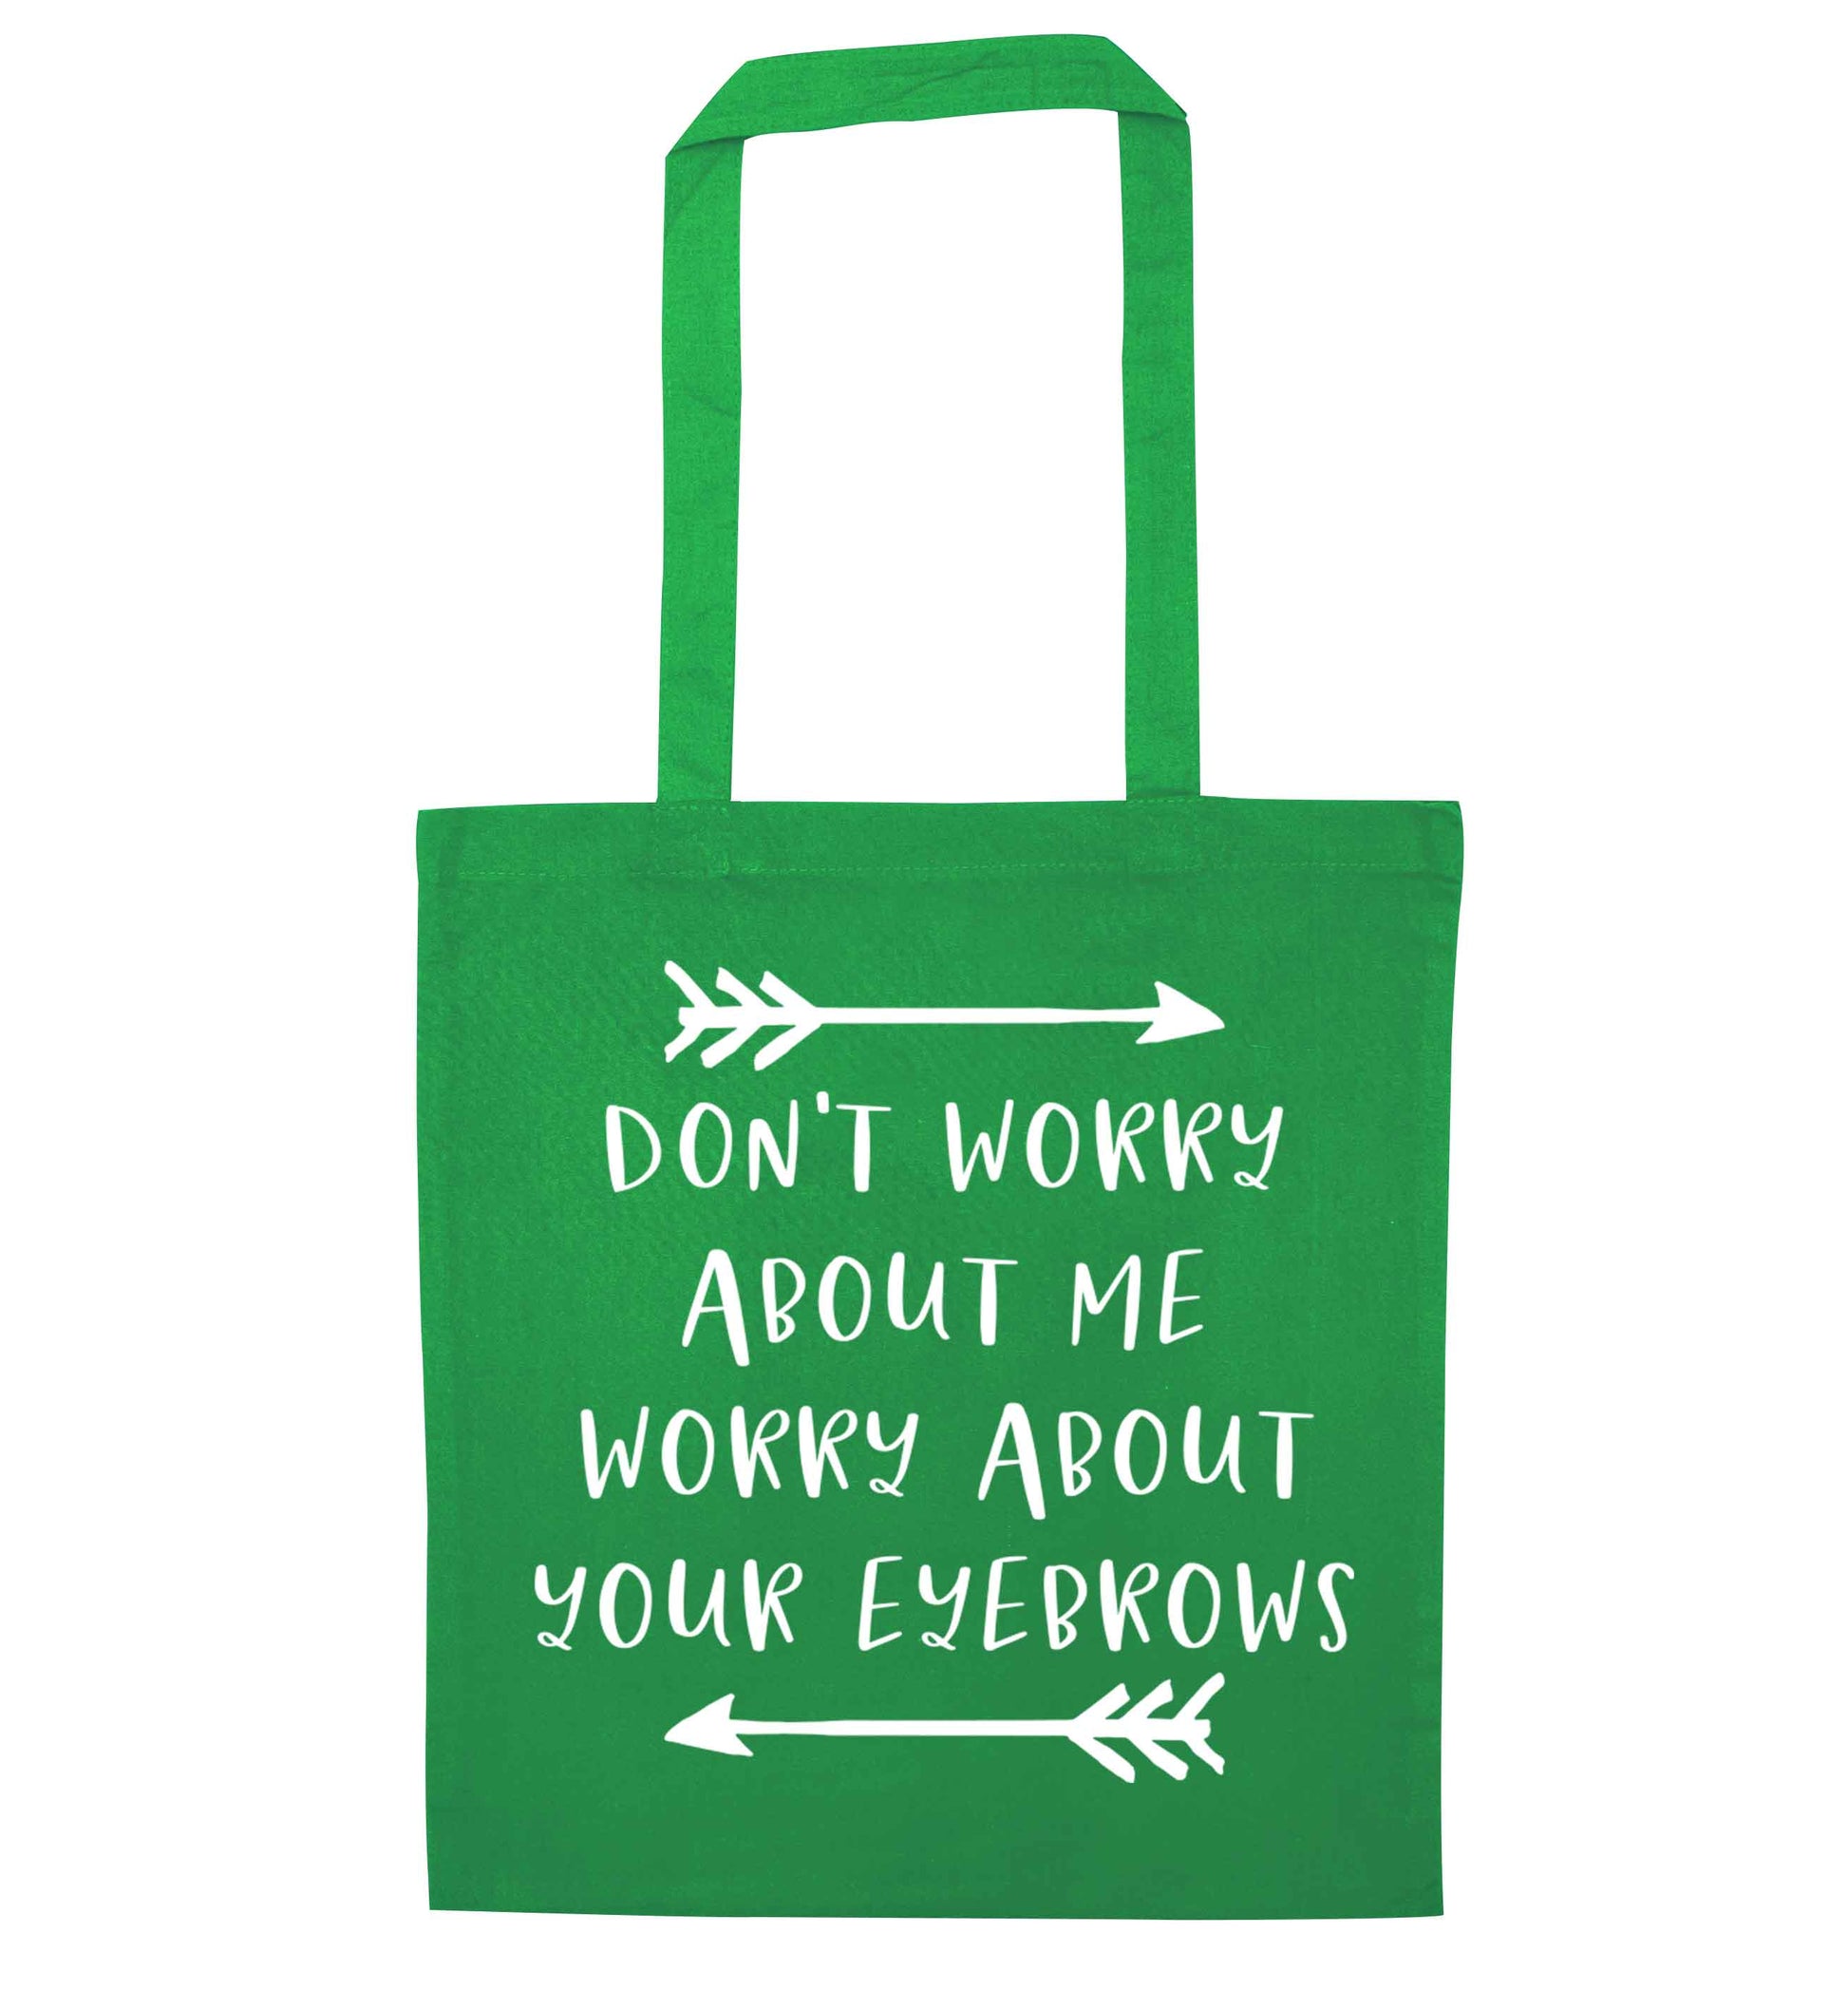 Don't worry about me worry about your eyebrows green tote bag